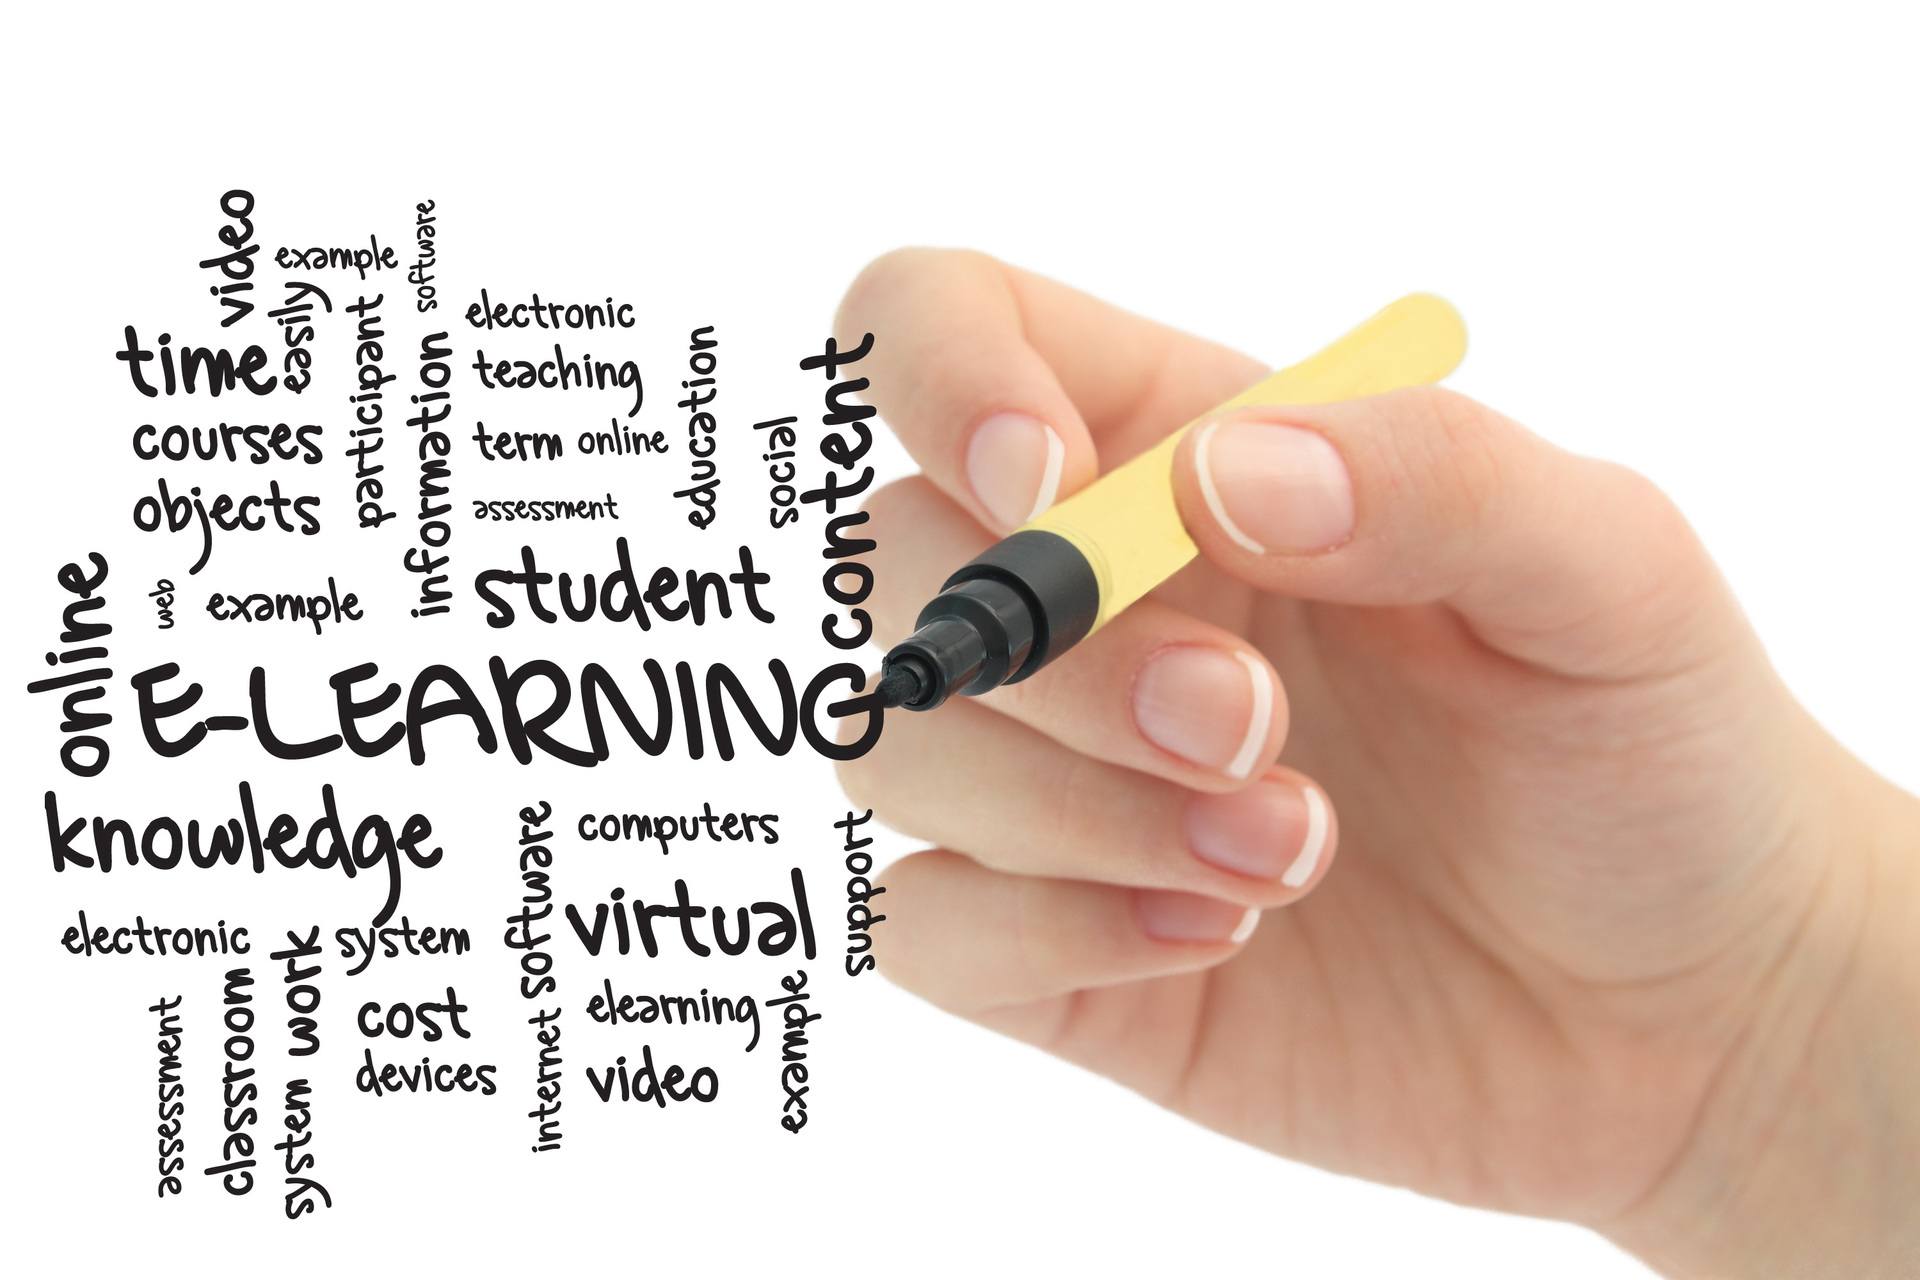 Top 10 Tips to Use Word Clouds in eLearning - eLearning Industry